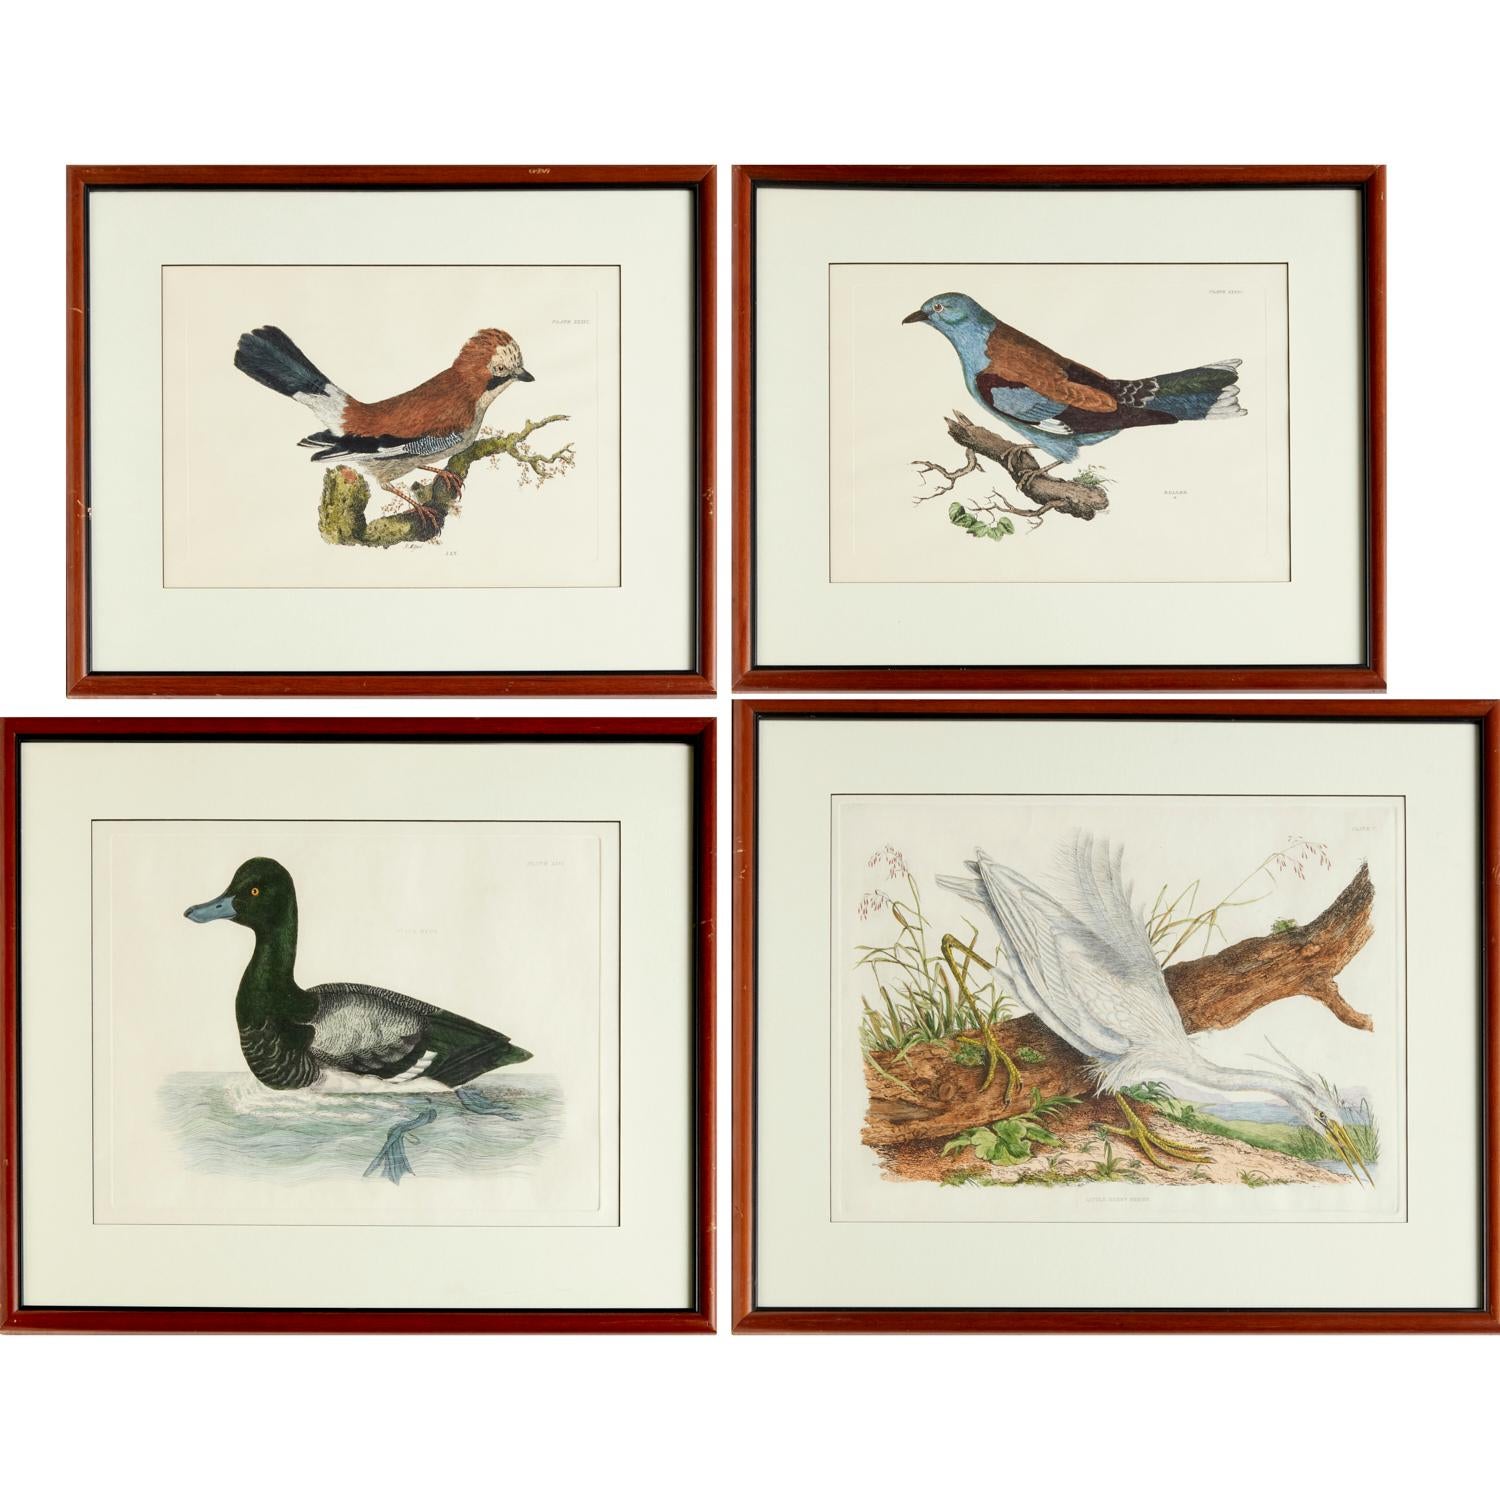 From Selby's Illustrations of British Ornithology (London: 1841-1846). Likely a restrike printing (20th c.,) hand-colored prints, embossed with plate marks, includes two after Prideaux John Selby: 